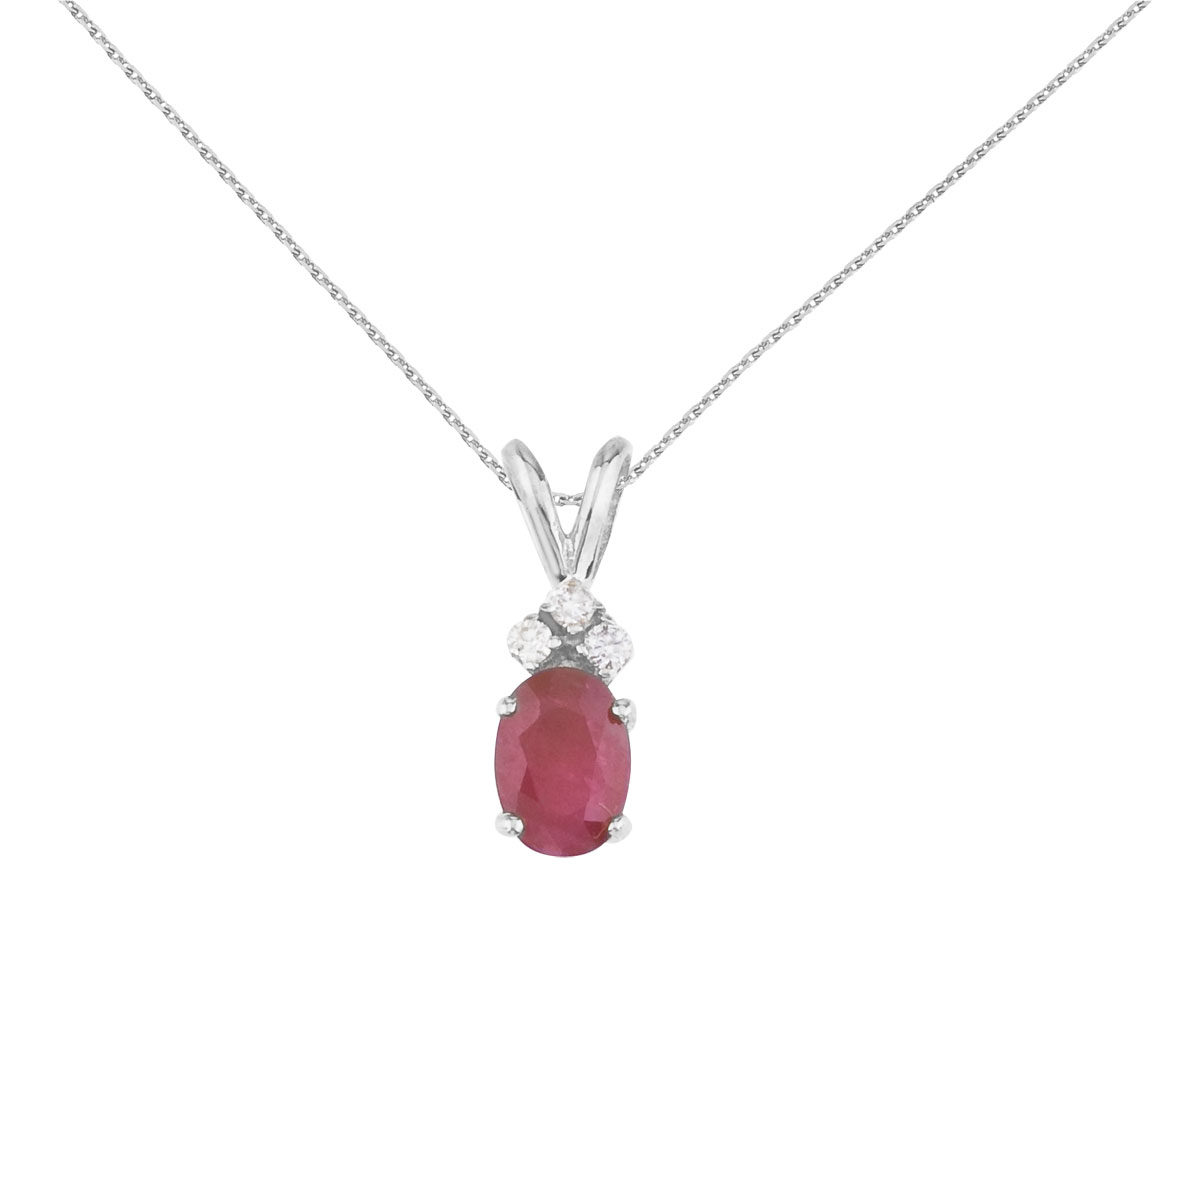 7x5 mm oval natural ruby pendant topped with 3 bright diamonds set in 14k white gold.